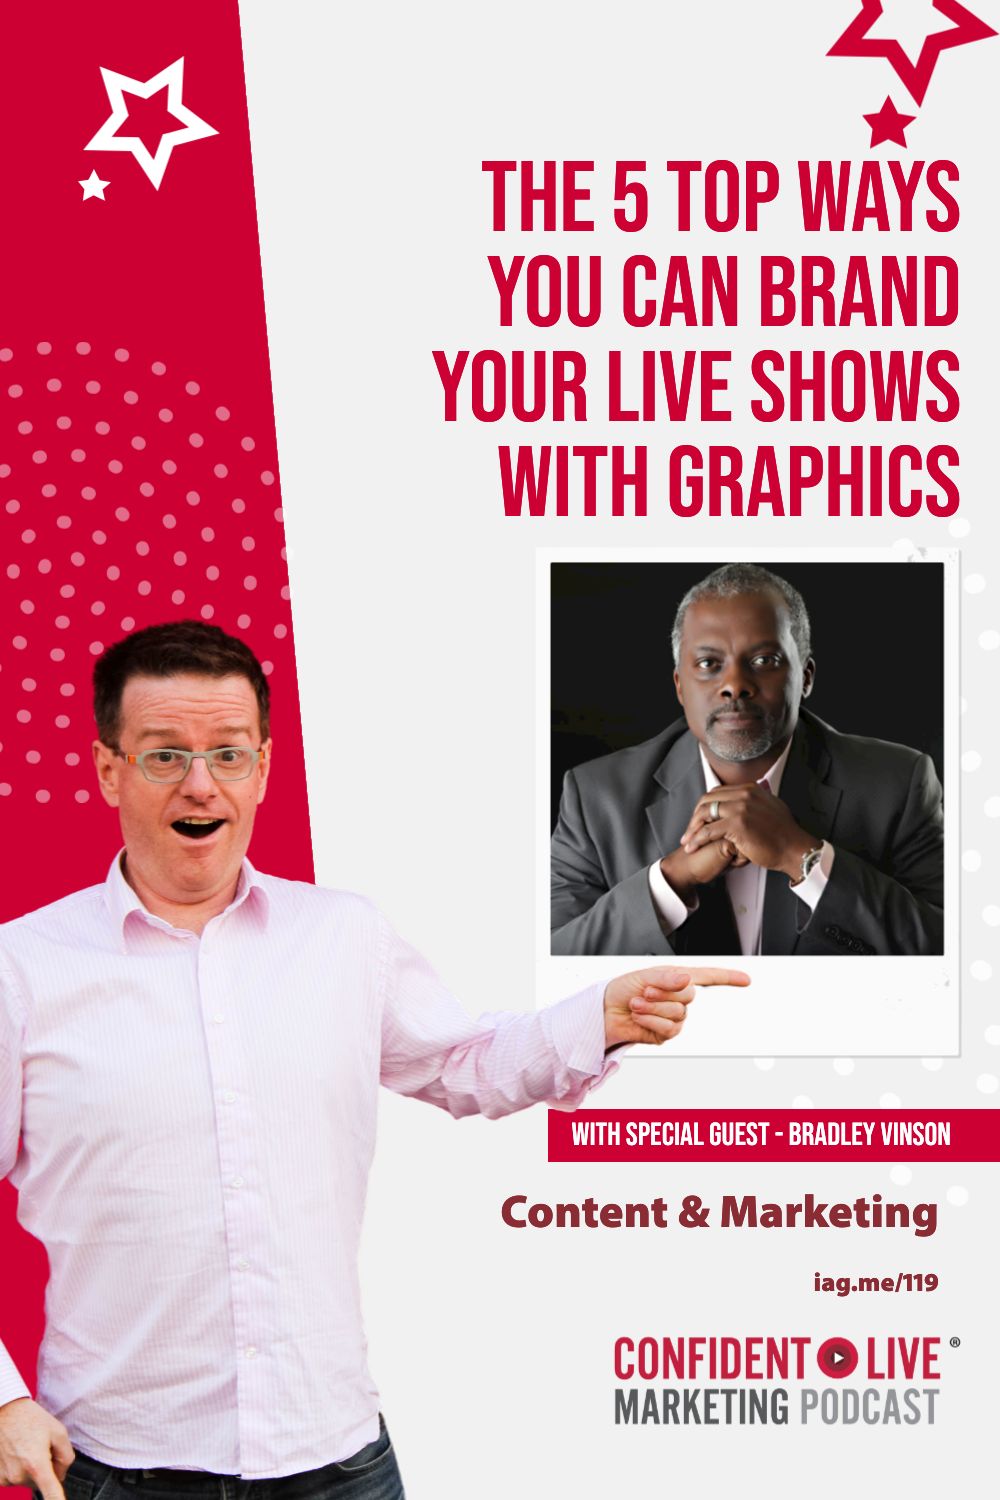 The 5 Top Ways you can Brand your Live Shows with Graphics